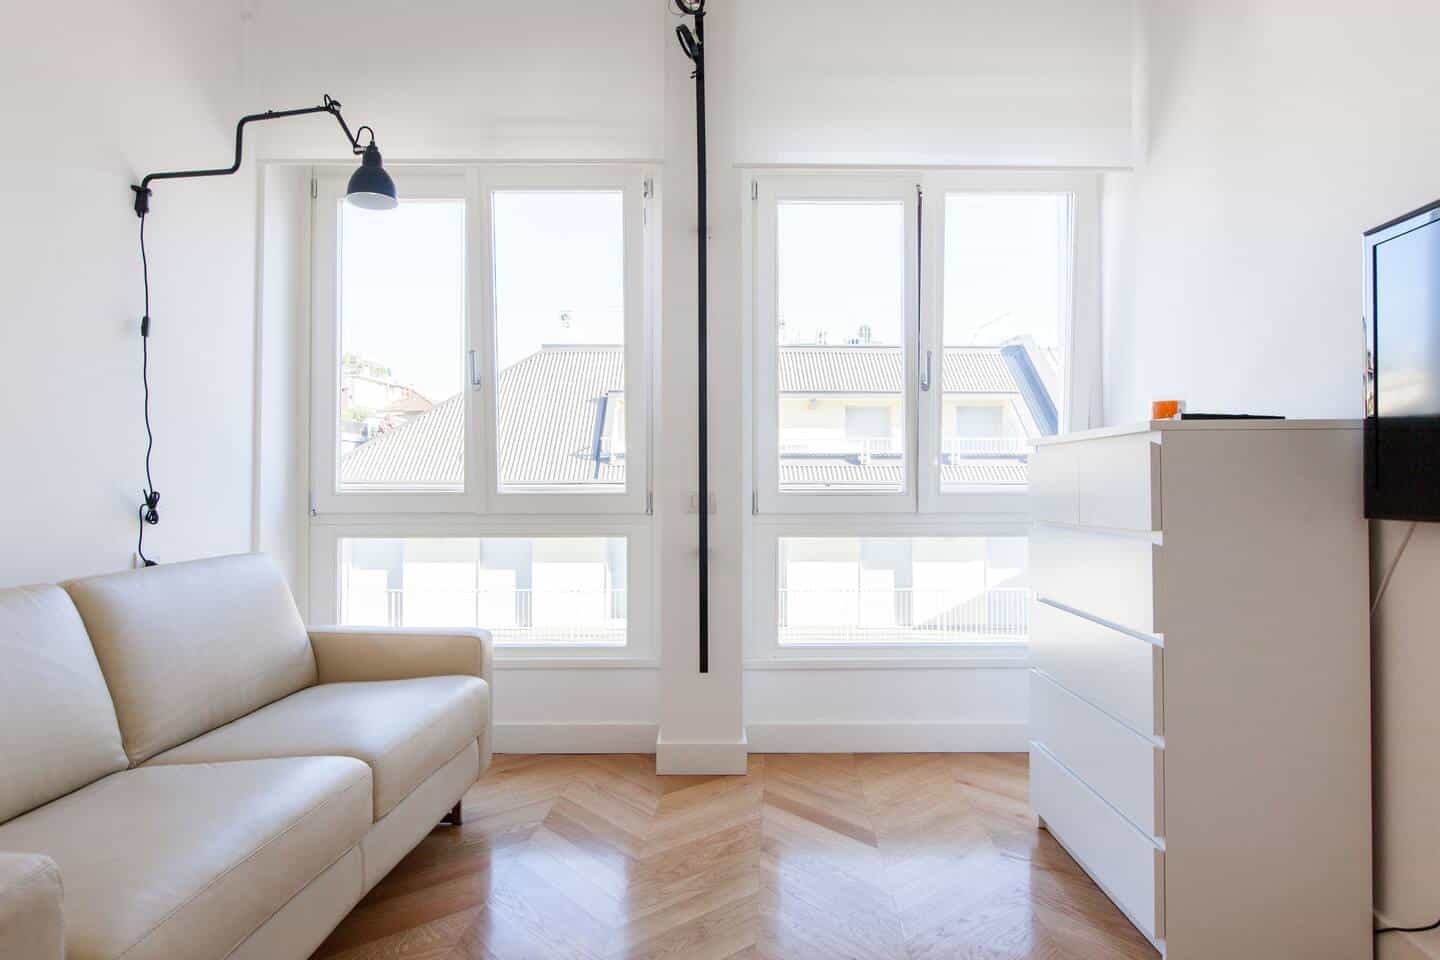 Image of Airbnb rental in Milan, Italy